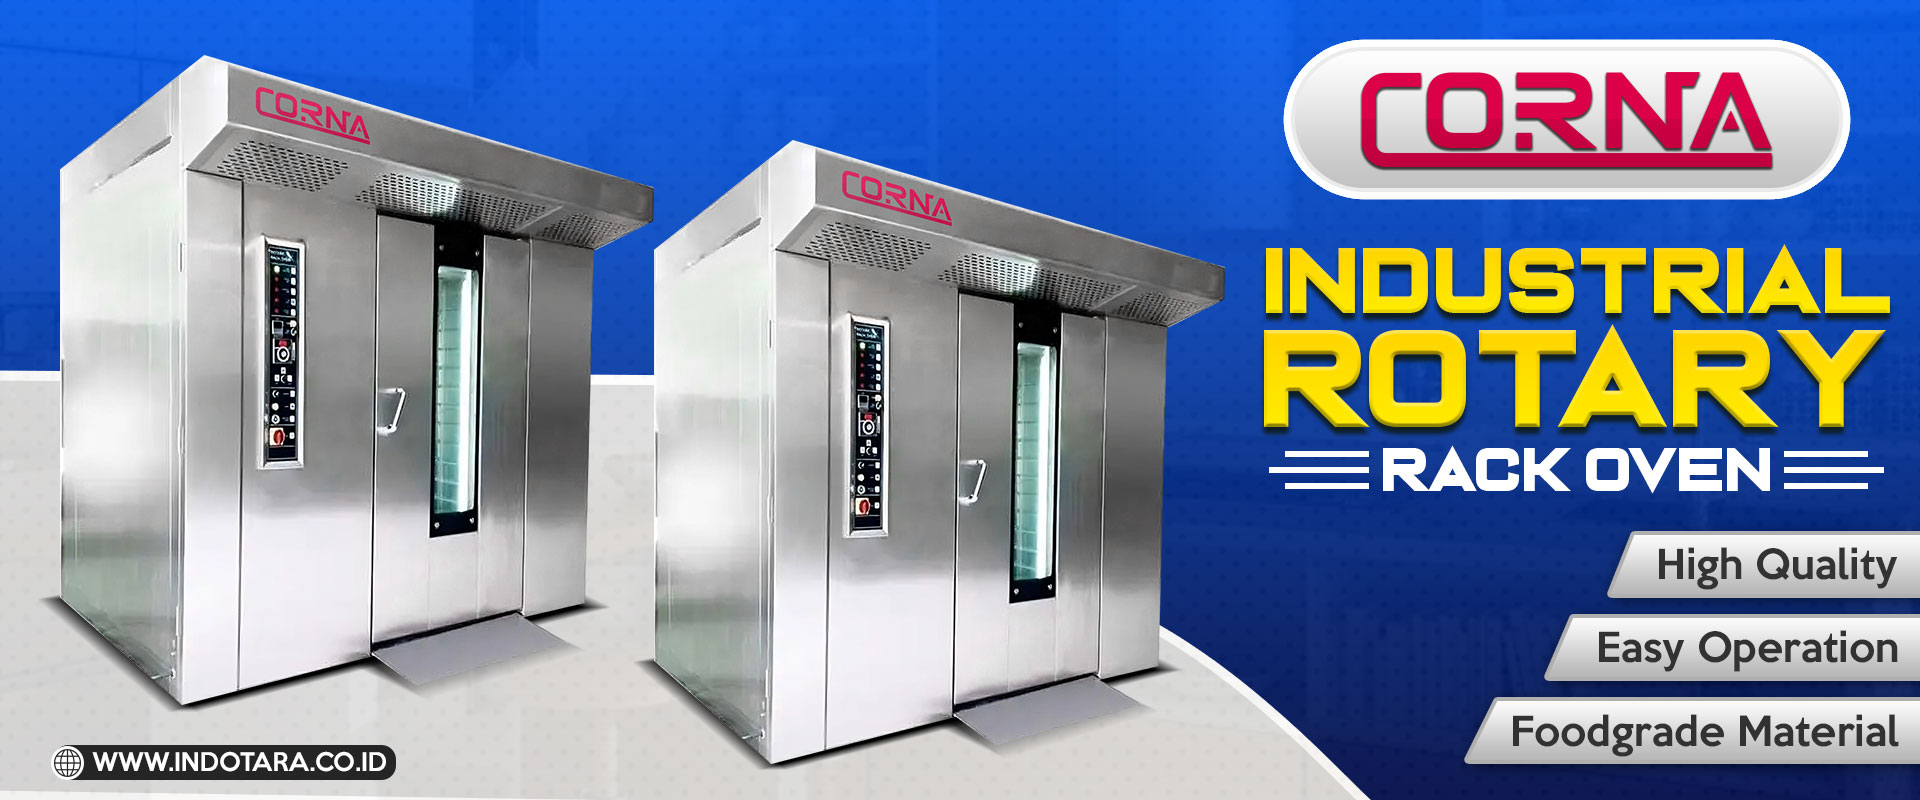 Jual Industrial Rotary Rack Oven